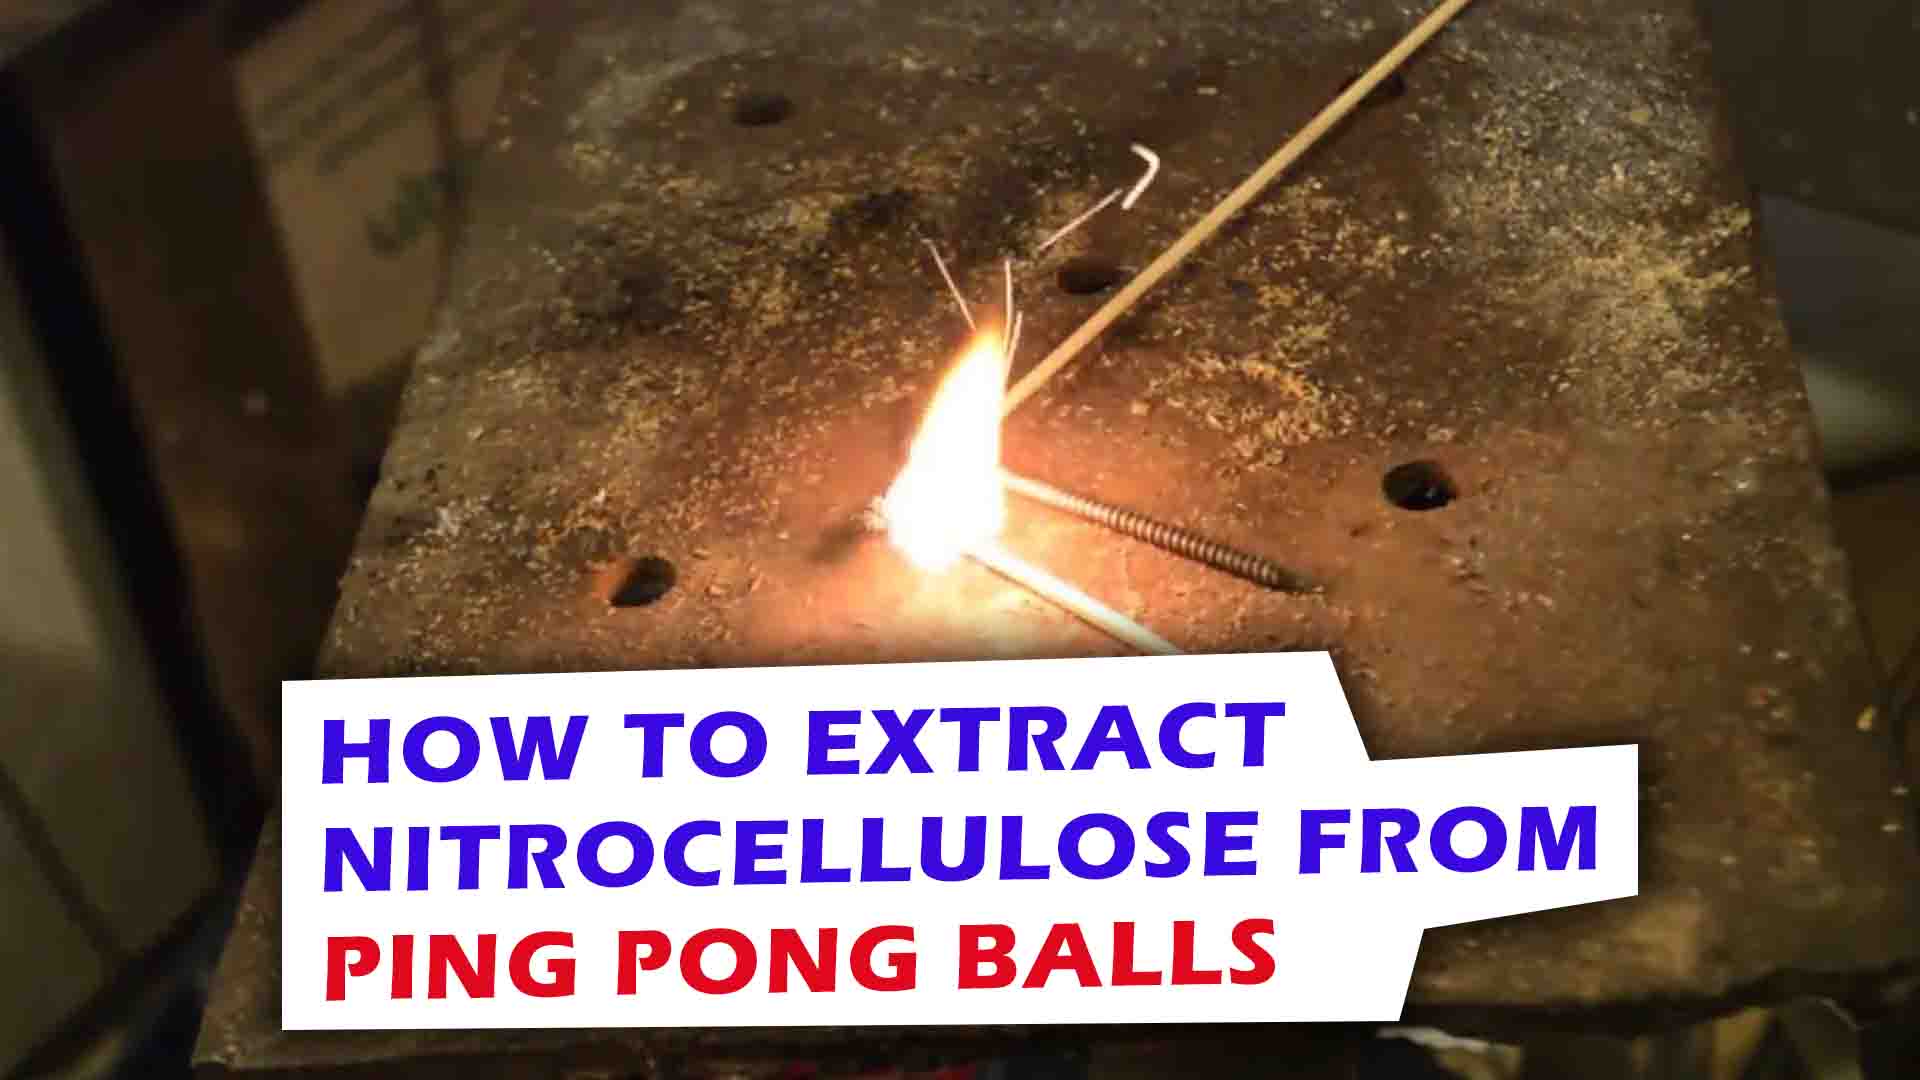 How to Extract Nitrocellulose from Ping Pong Balls